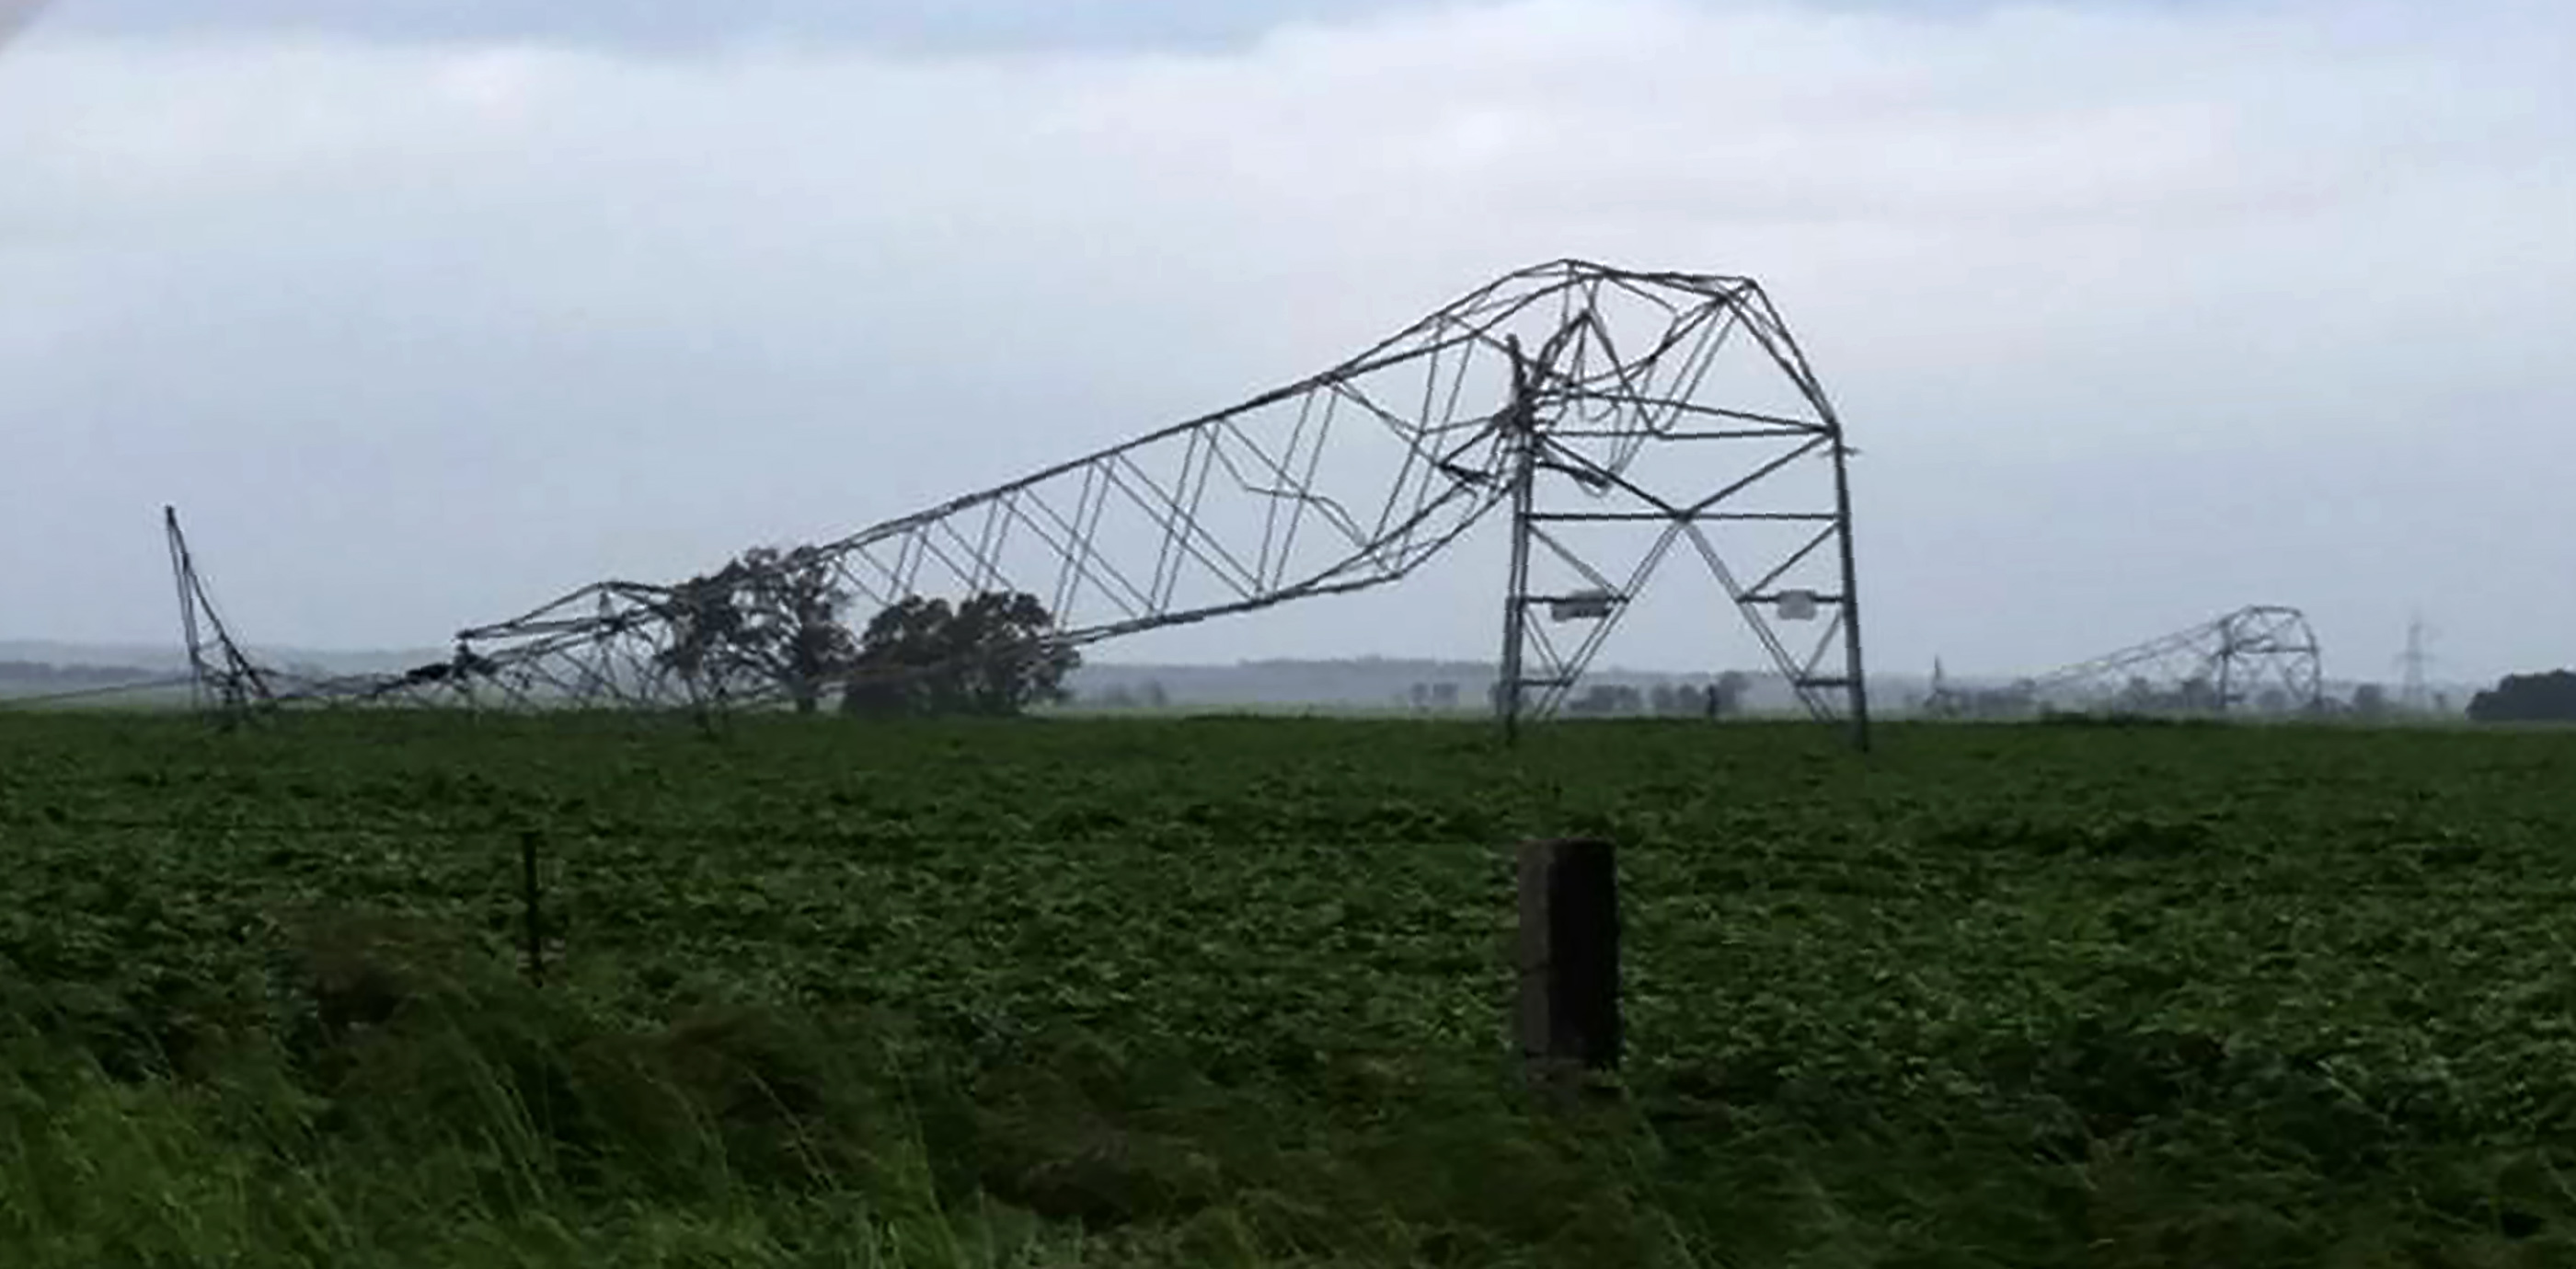 A photo taken on September 28 and obtained on September 29, 2016, shows transmission towers carrying power lines, toppled by high winds near Melrose in South Australia.  Australia on Thursday after "unprecedented" thunderstorms knocked out supply to the entire population. The blackout caused chaos and widespread damage was reported as authorities warned of more wild weather to come. / AFP PHOTO / DEBBIE PROSSER / DEBBIE PROSSER